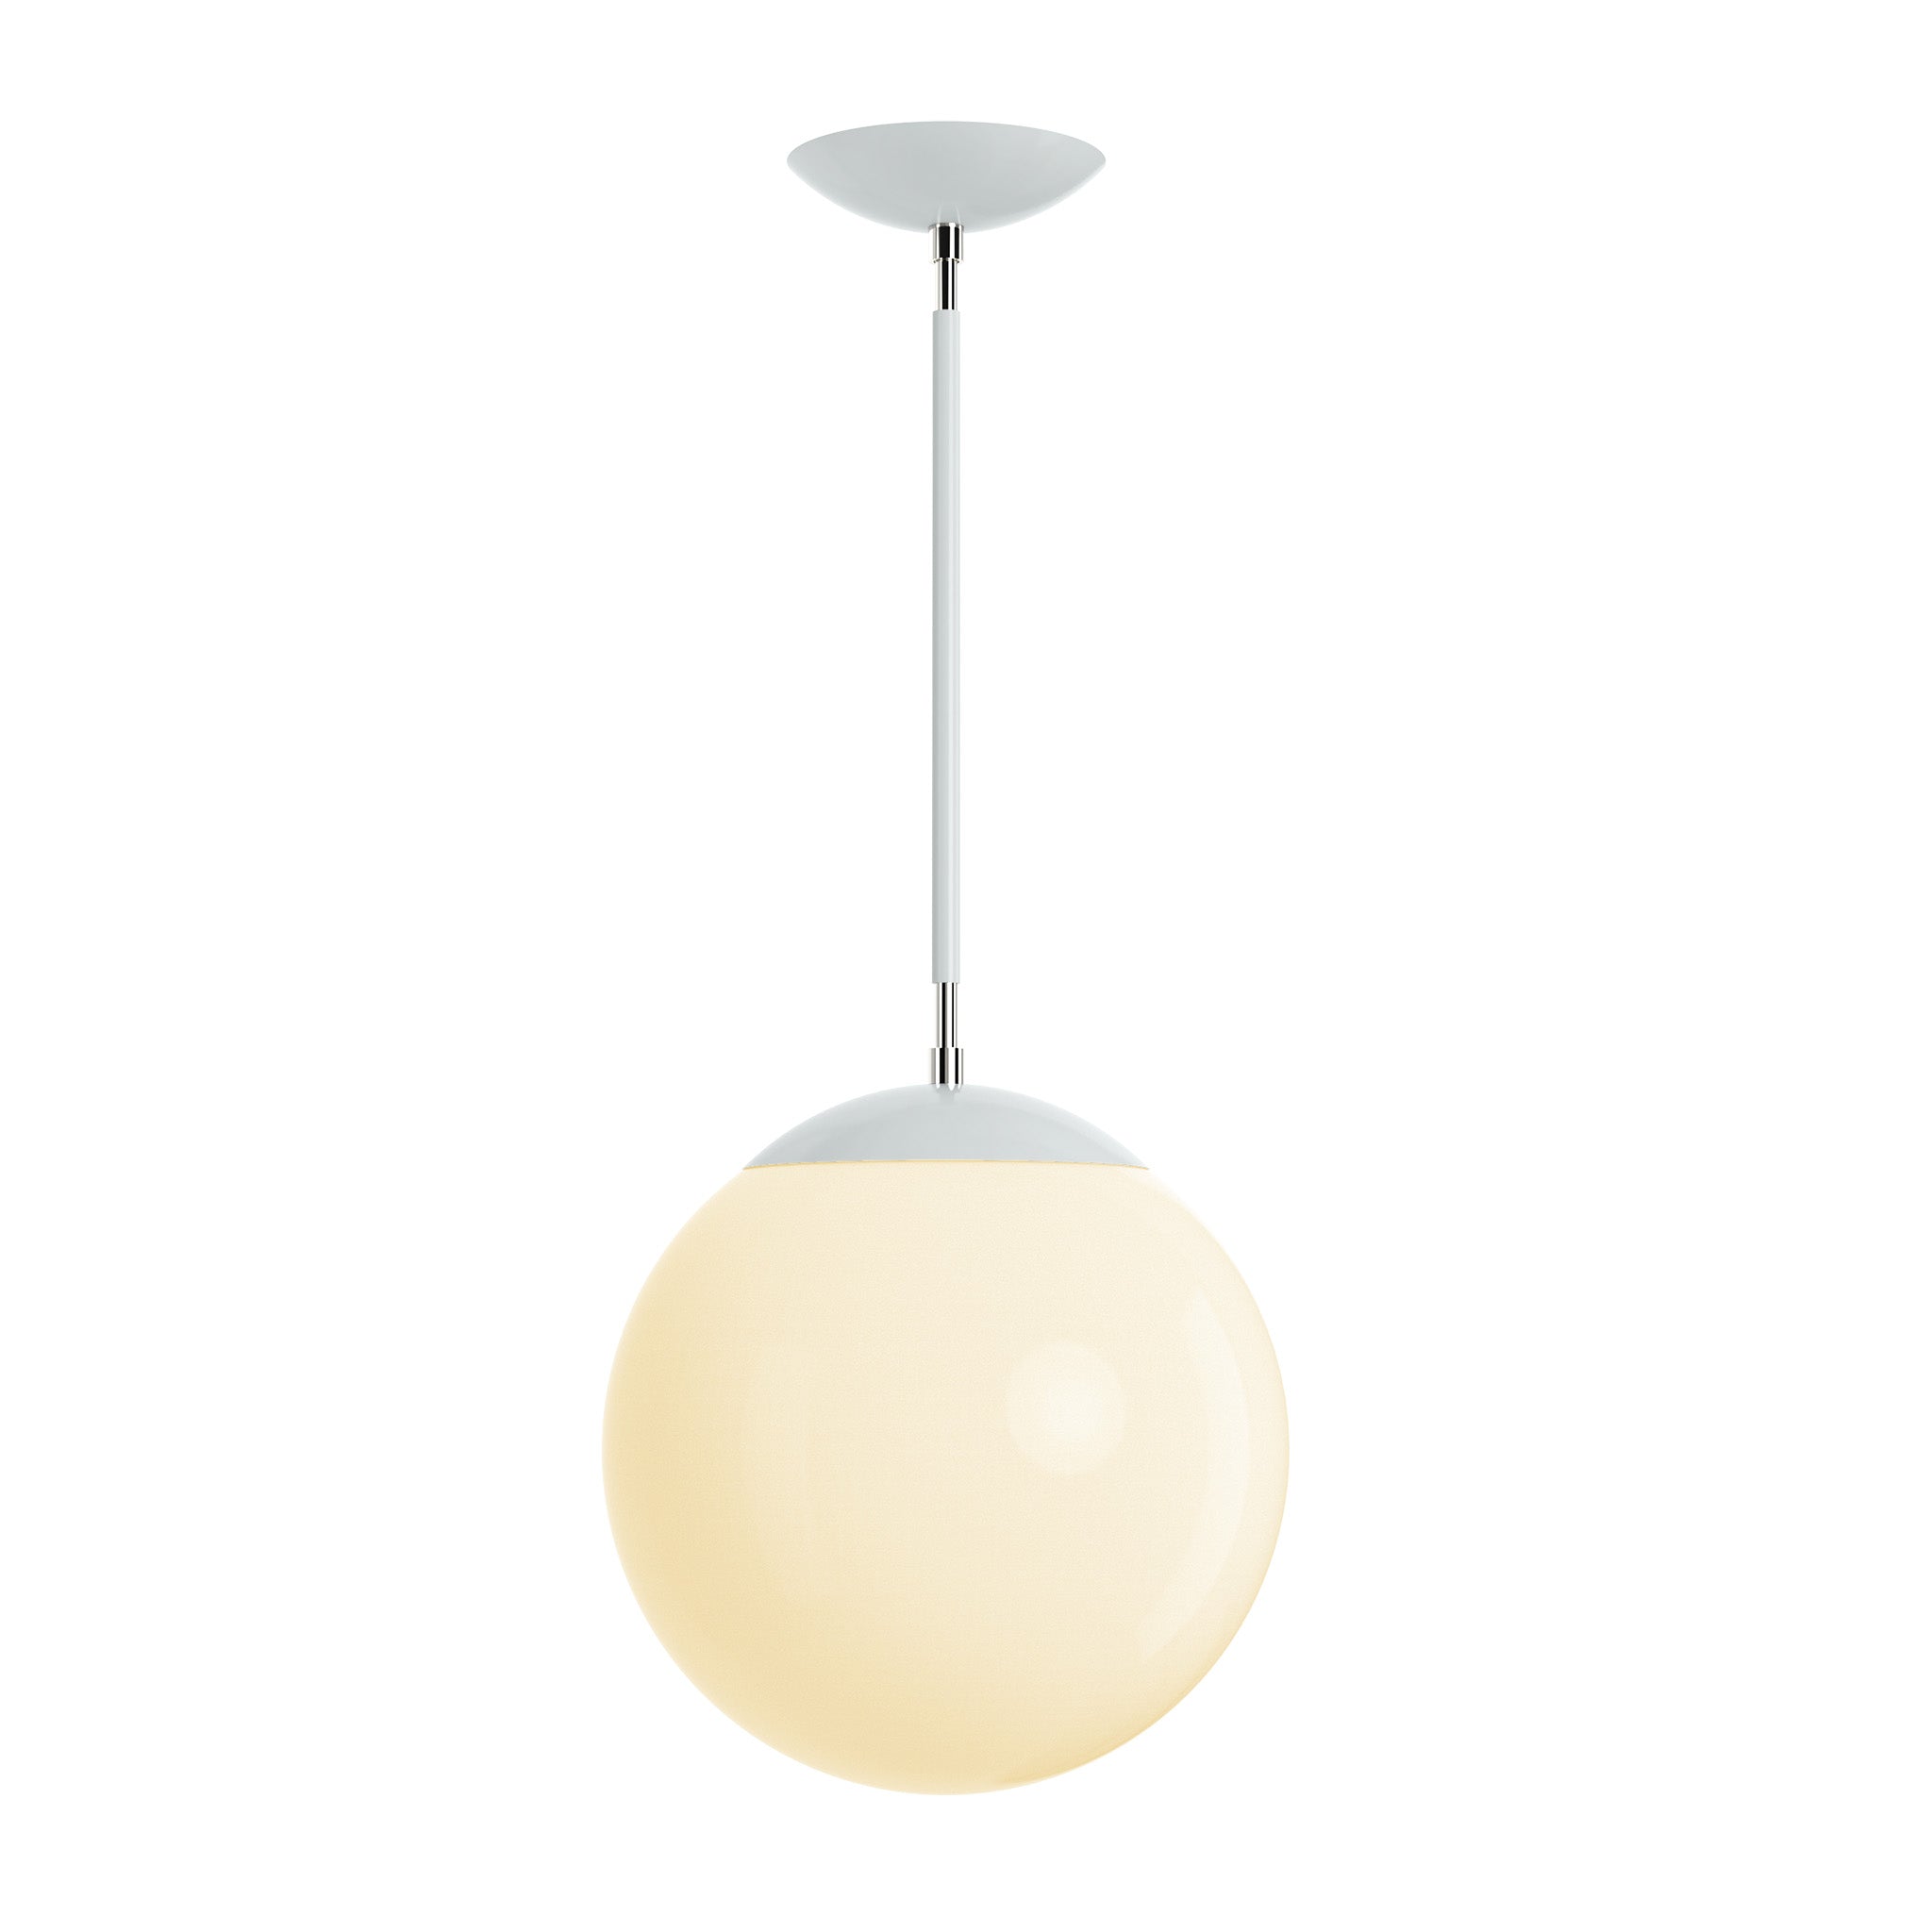 Polished nickel and chalk cap globe pendant 12" dutton brown lighting